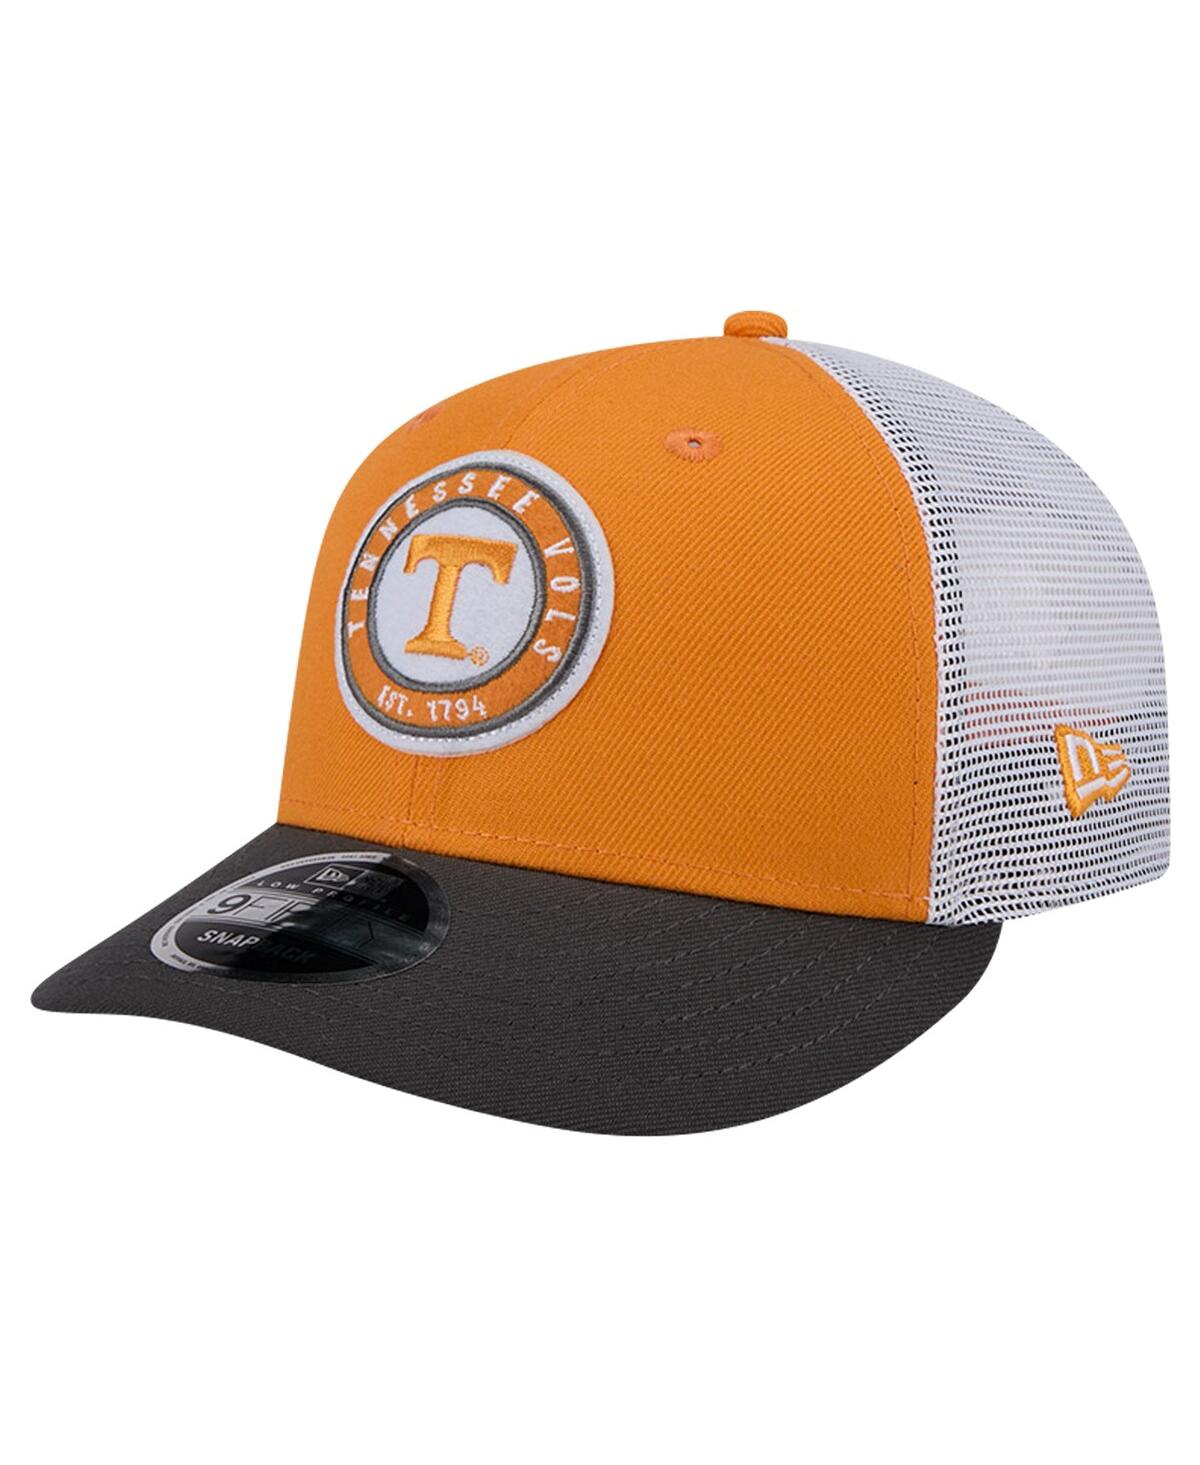 Shop New Era Men's Tennessee Orange Tennessee Volunteers Throwback Circle Patch 9fifty Trucker Snapback Hat